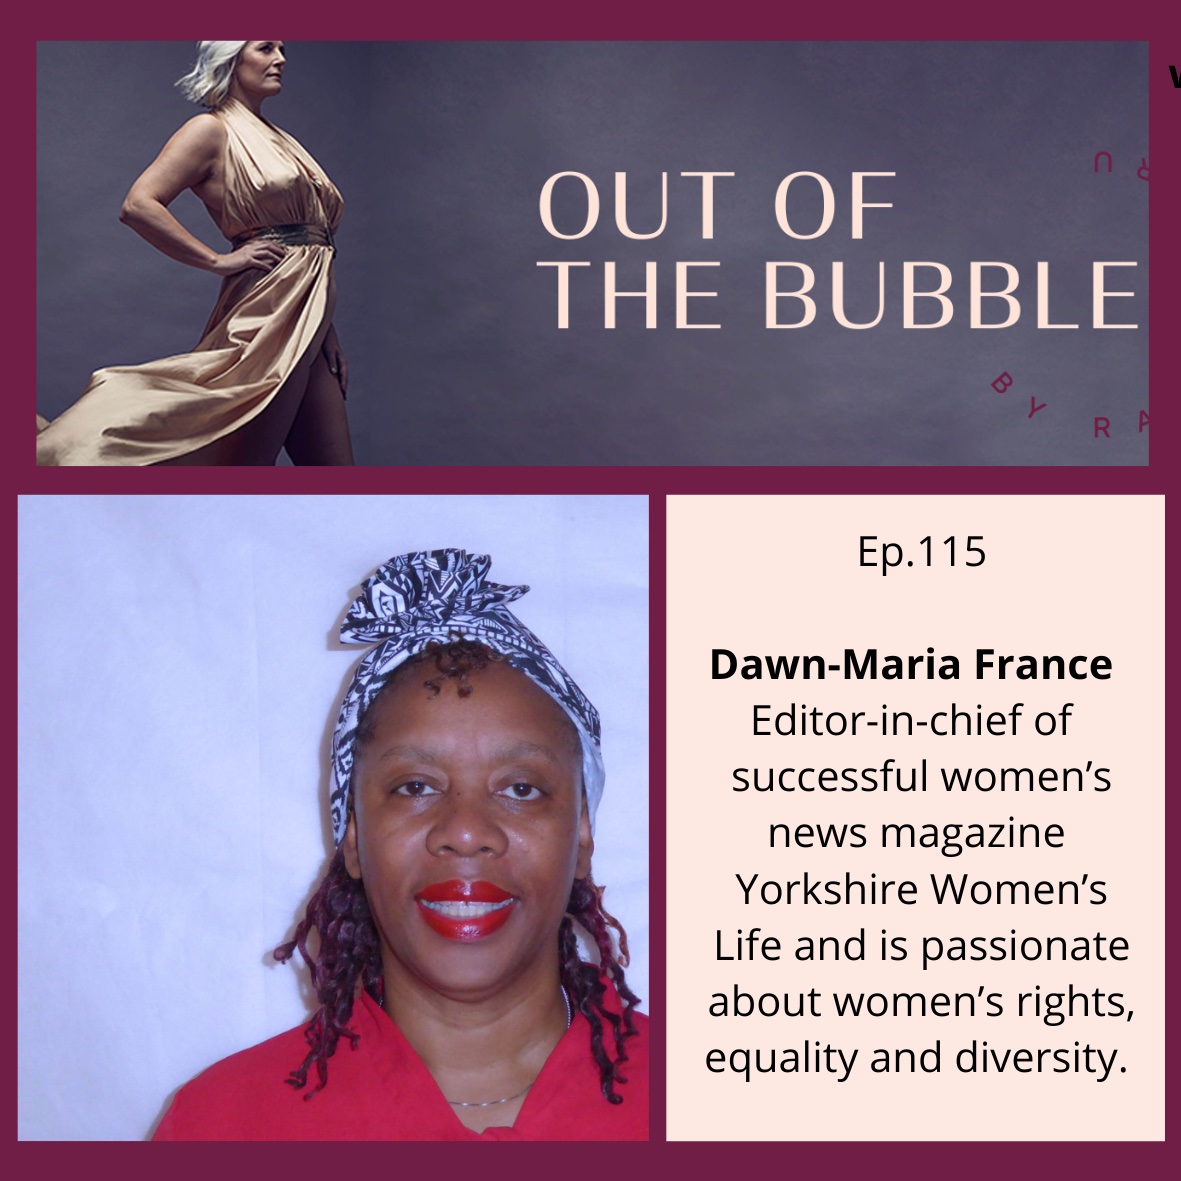 Ep.115.Award-winning journalist Dawn-Maria France with a passion for women's rights, equality and diversity